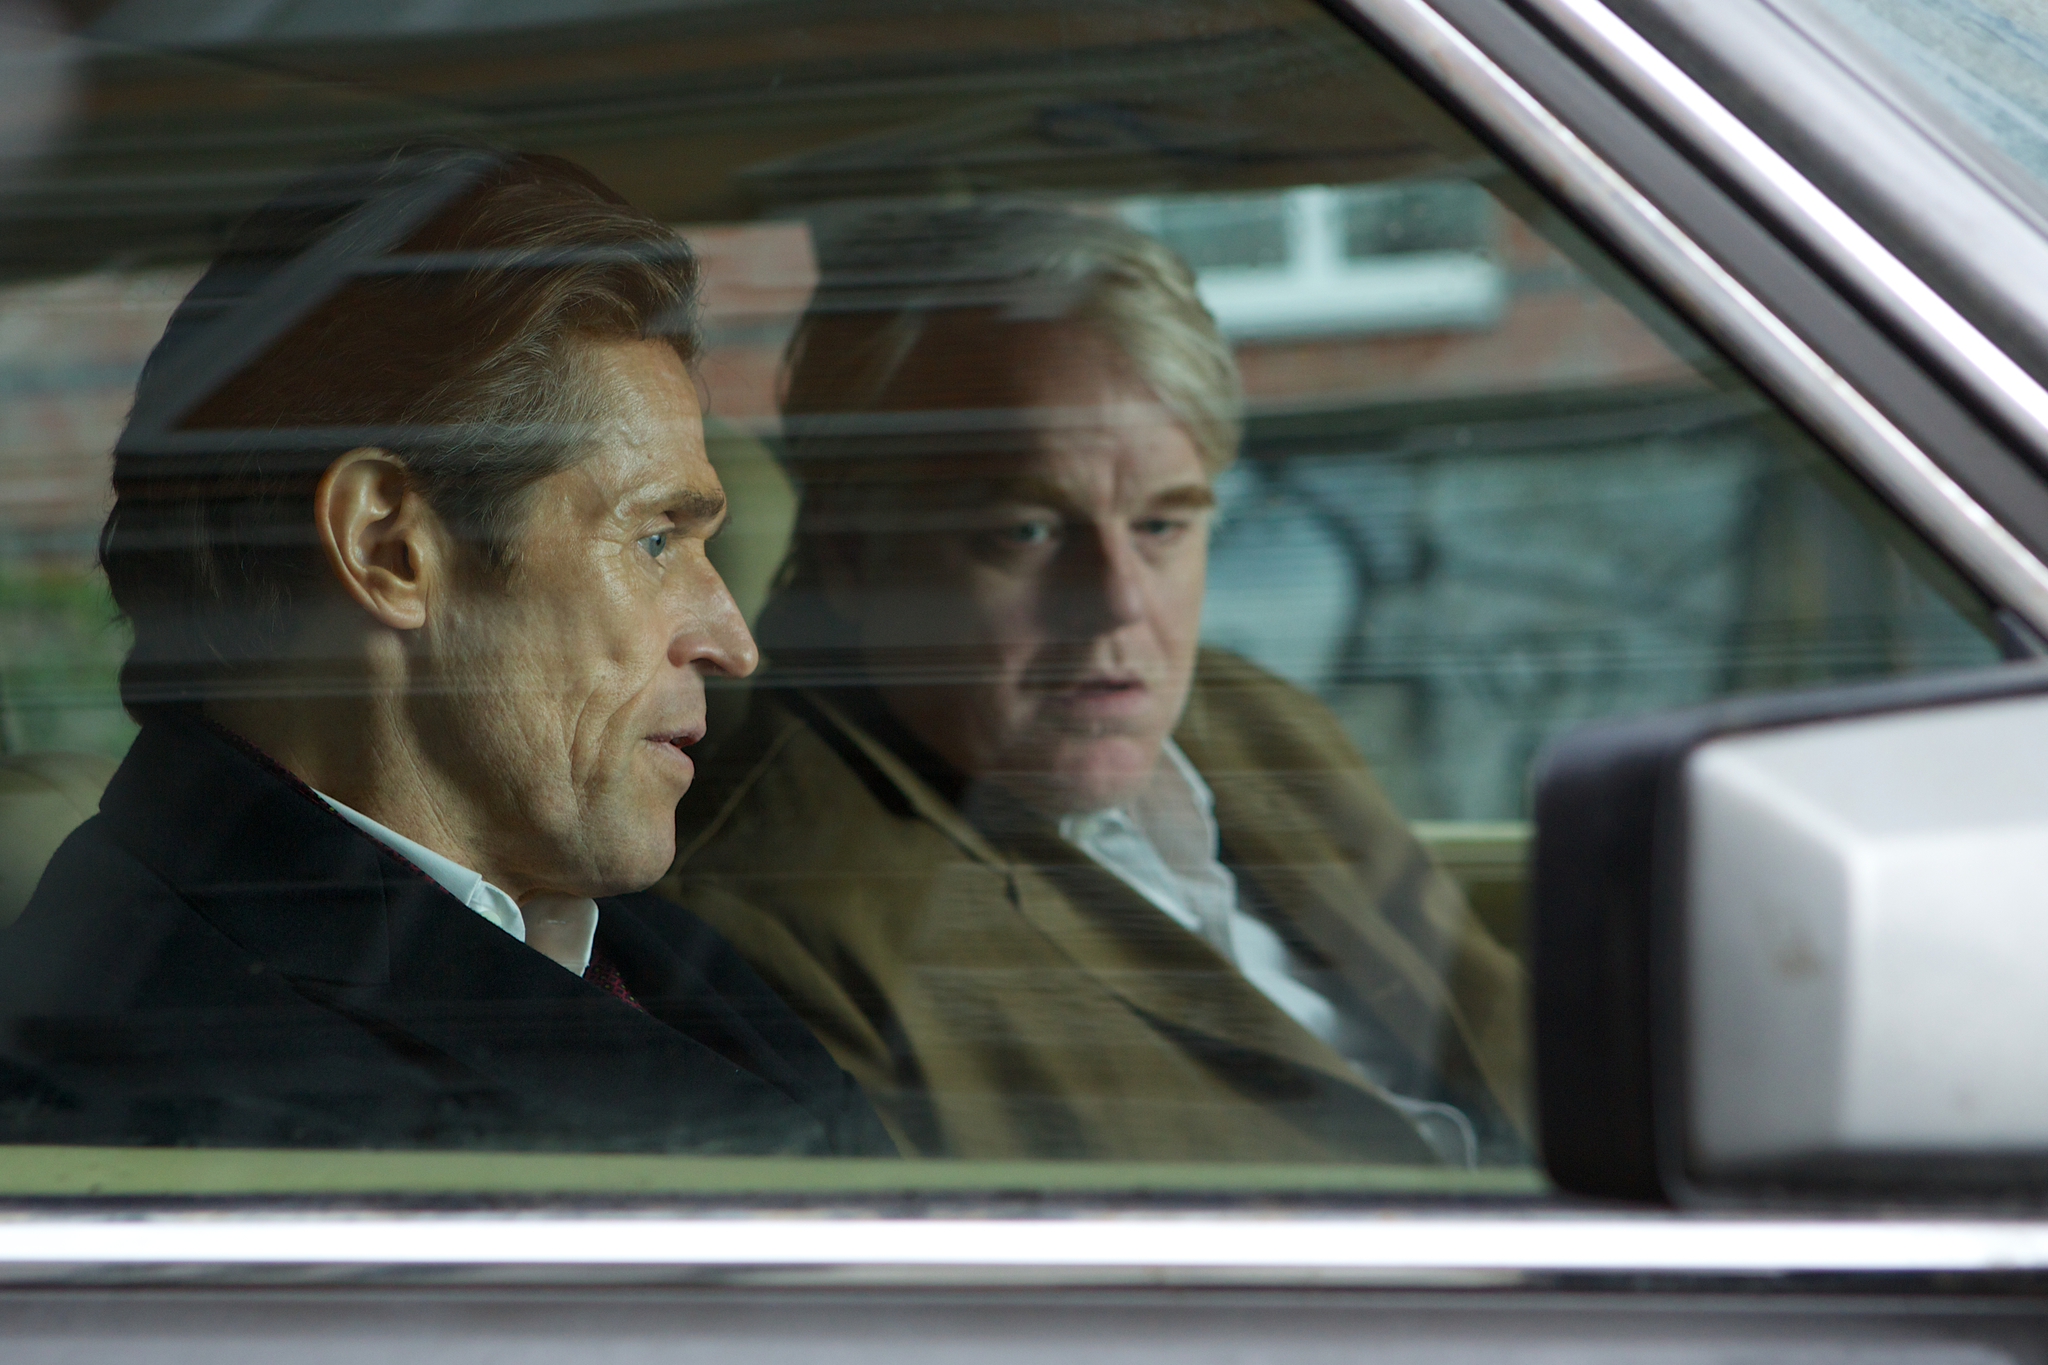 Still of Willem Dafoe and Philip Seymour Hoffman in A Most Wanted Man (2014)